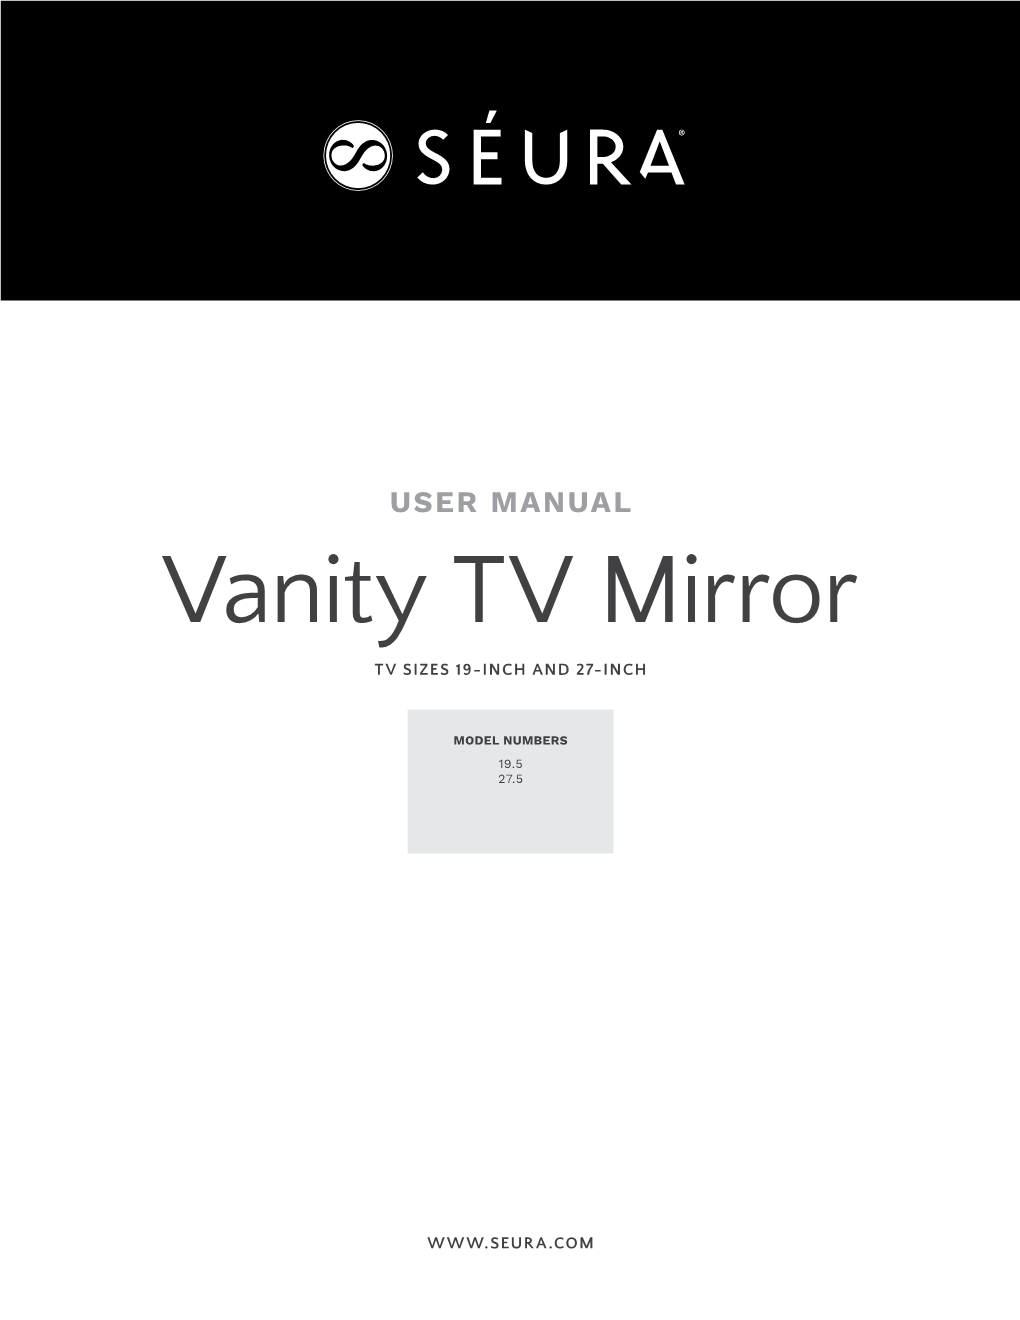 Vanity TV Mirror TV SIZES 19-INCH and 27-INCH